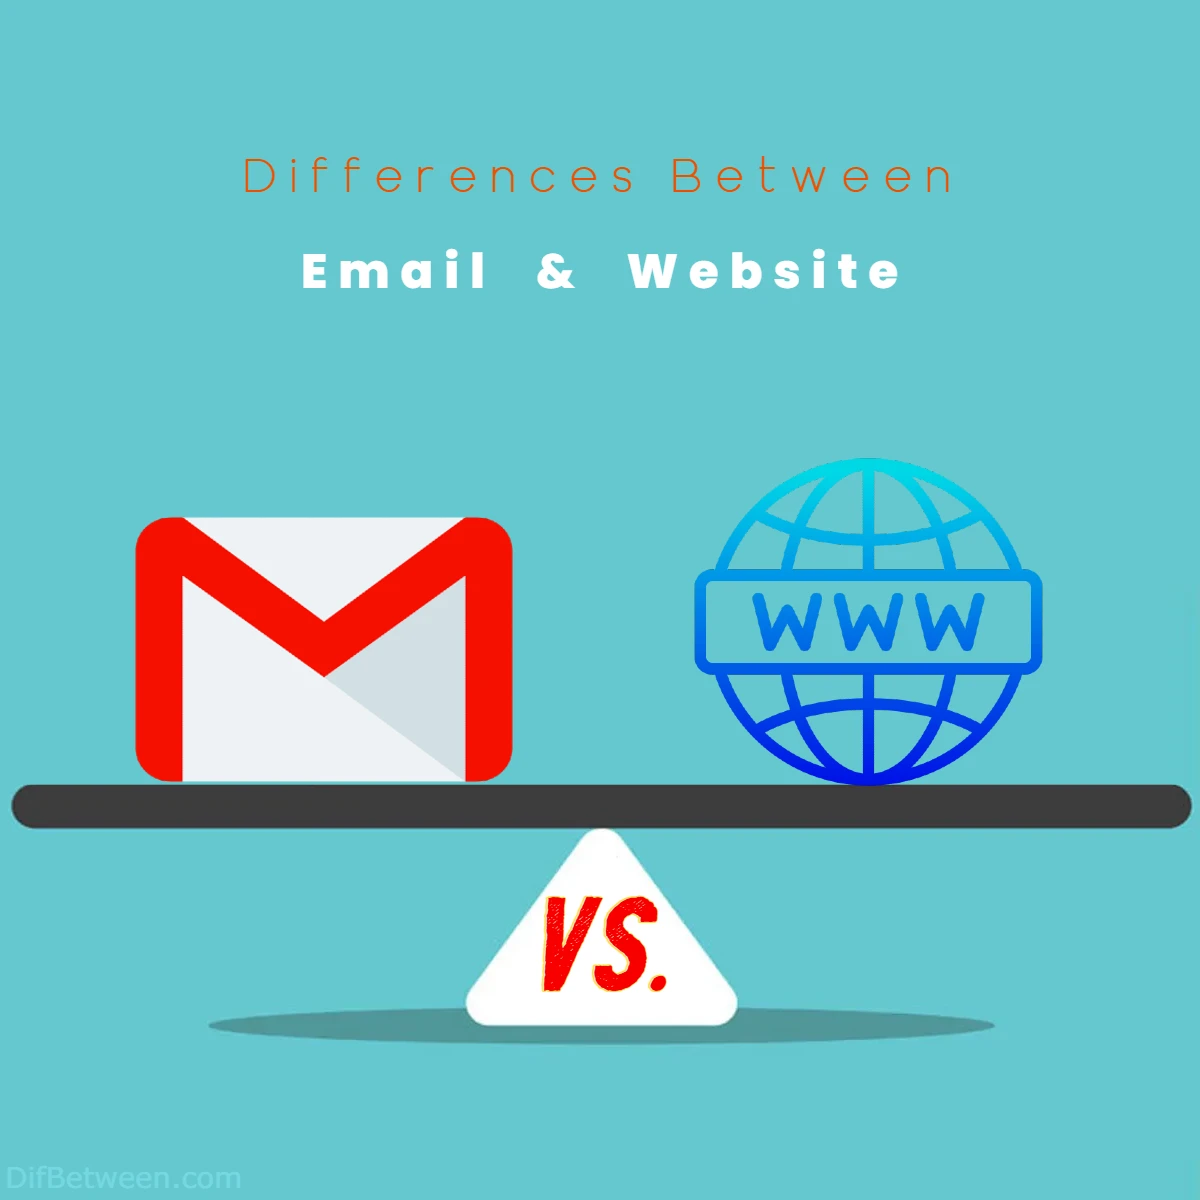 Differences Between Email vs Website